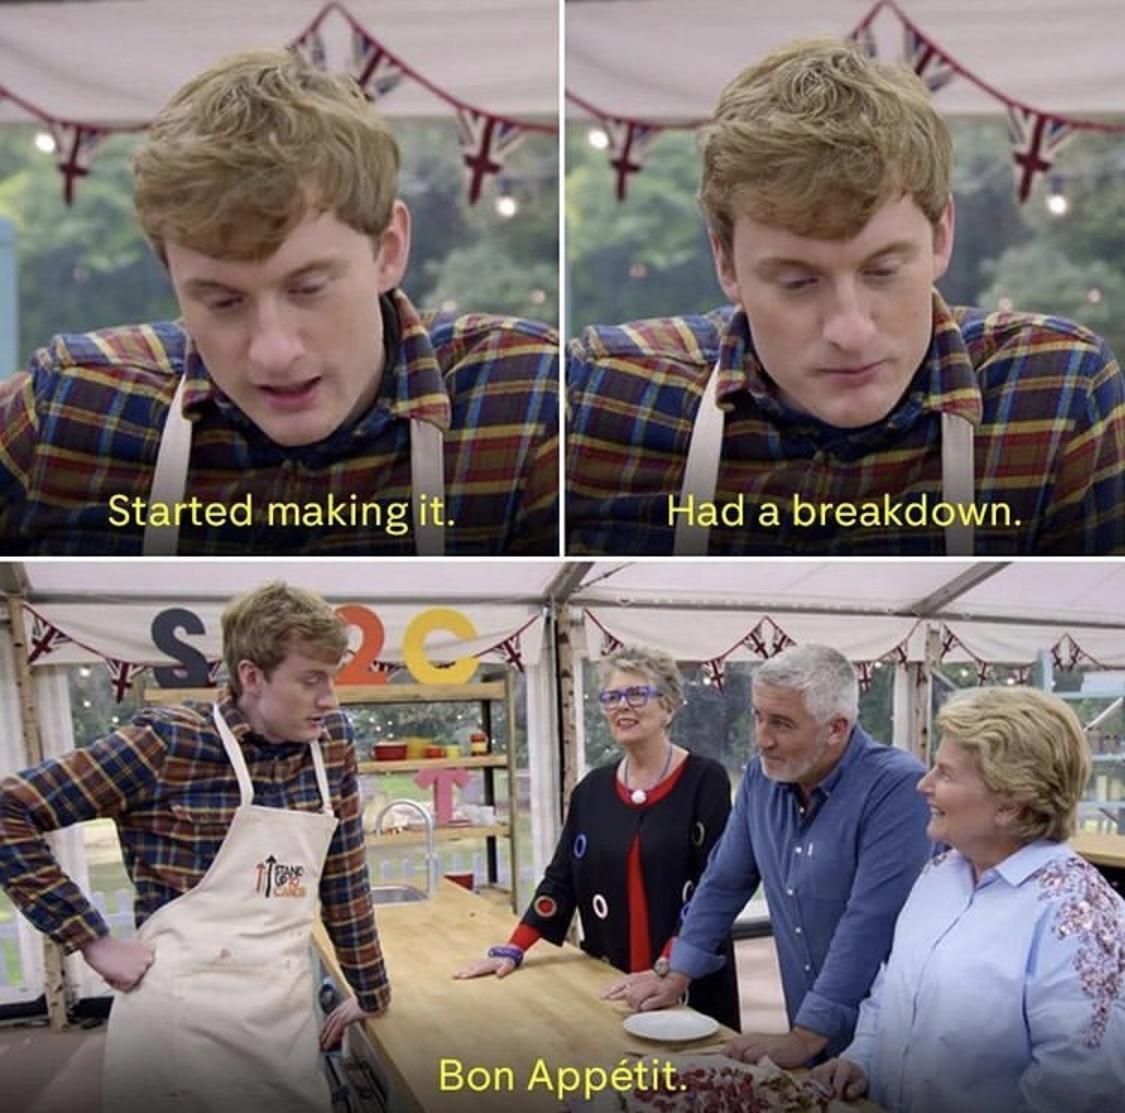 A scene from Great British Bake-Off where a contestant presents a mess and is asked what happened. He responds, "Started making it. Had a breakdown. Bon appetit."